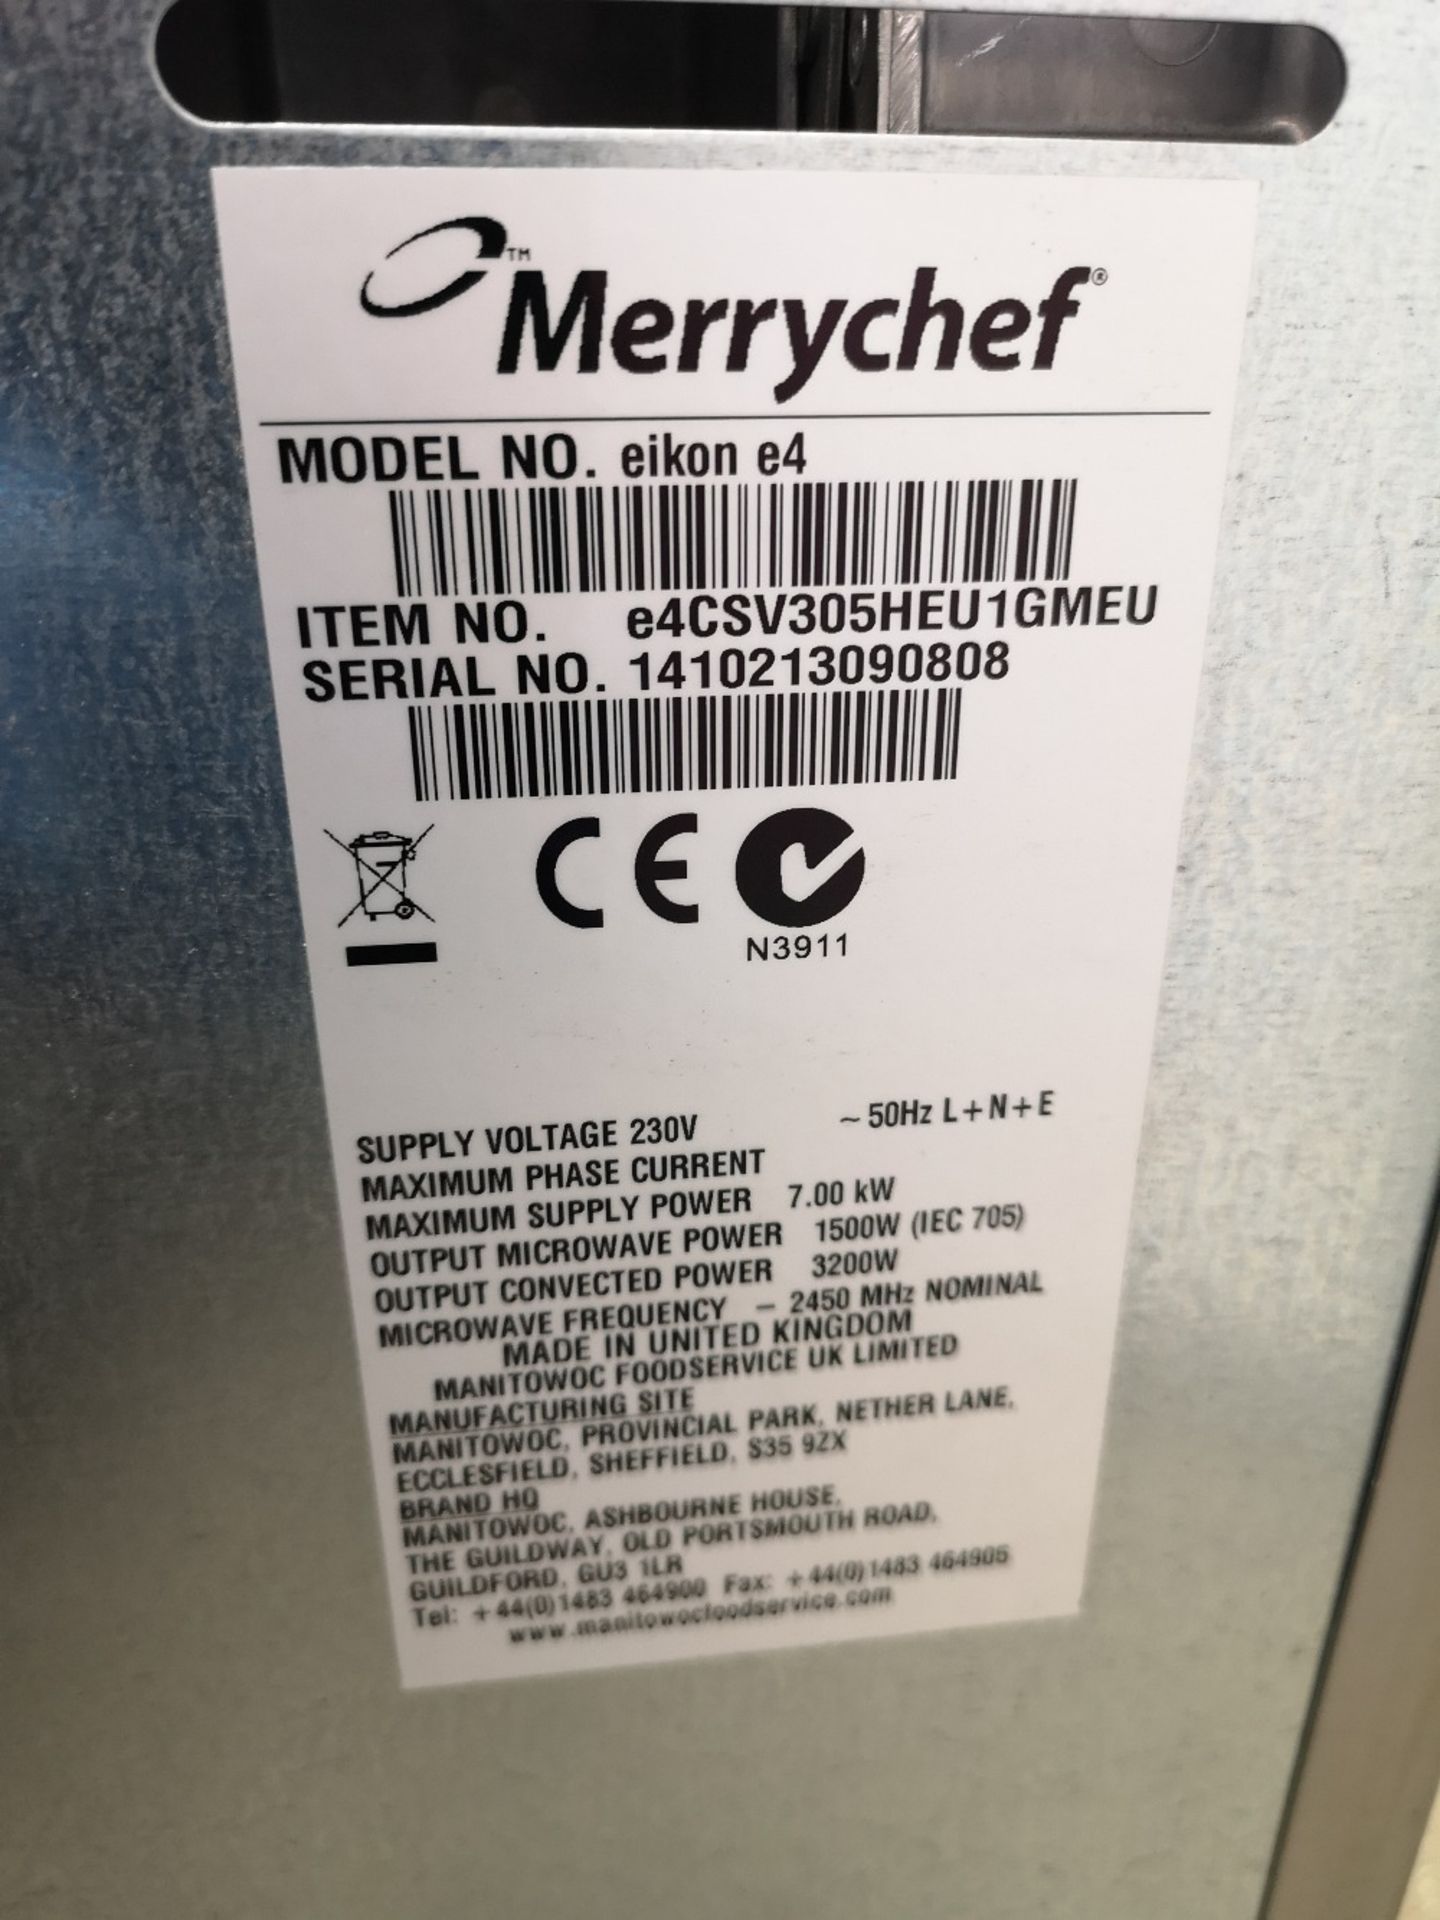 Merrychef Eikon e4 Combination Microwave Oven - Image 4 of 5